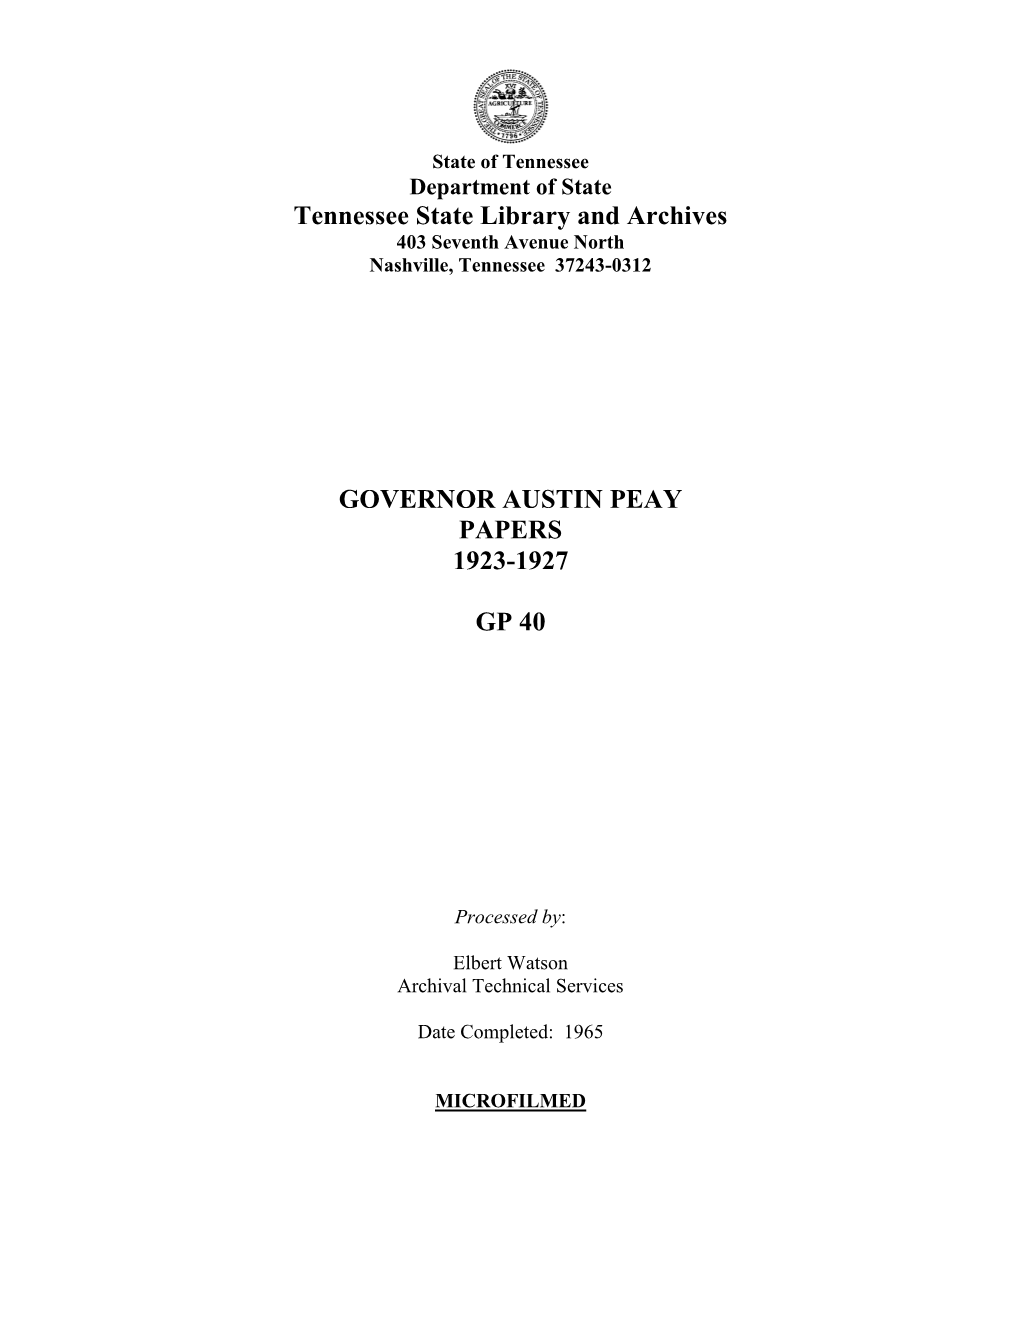 Tennessee State Library and Archives GOVERNOR AUSTIN PEAY PAPERS 1923-1927 GP 40